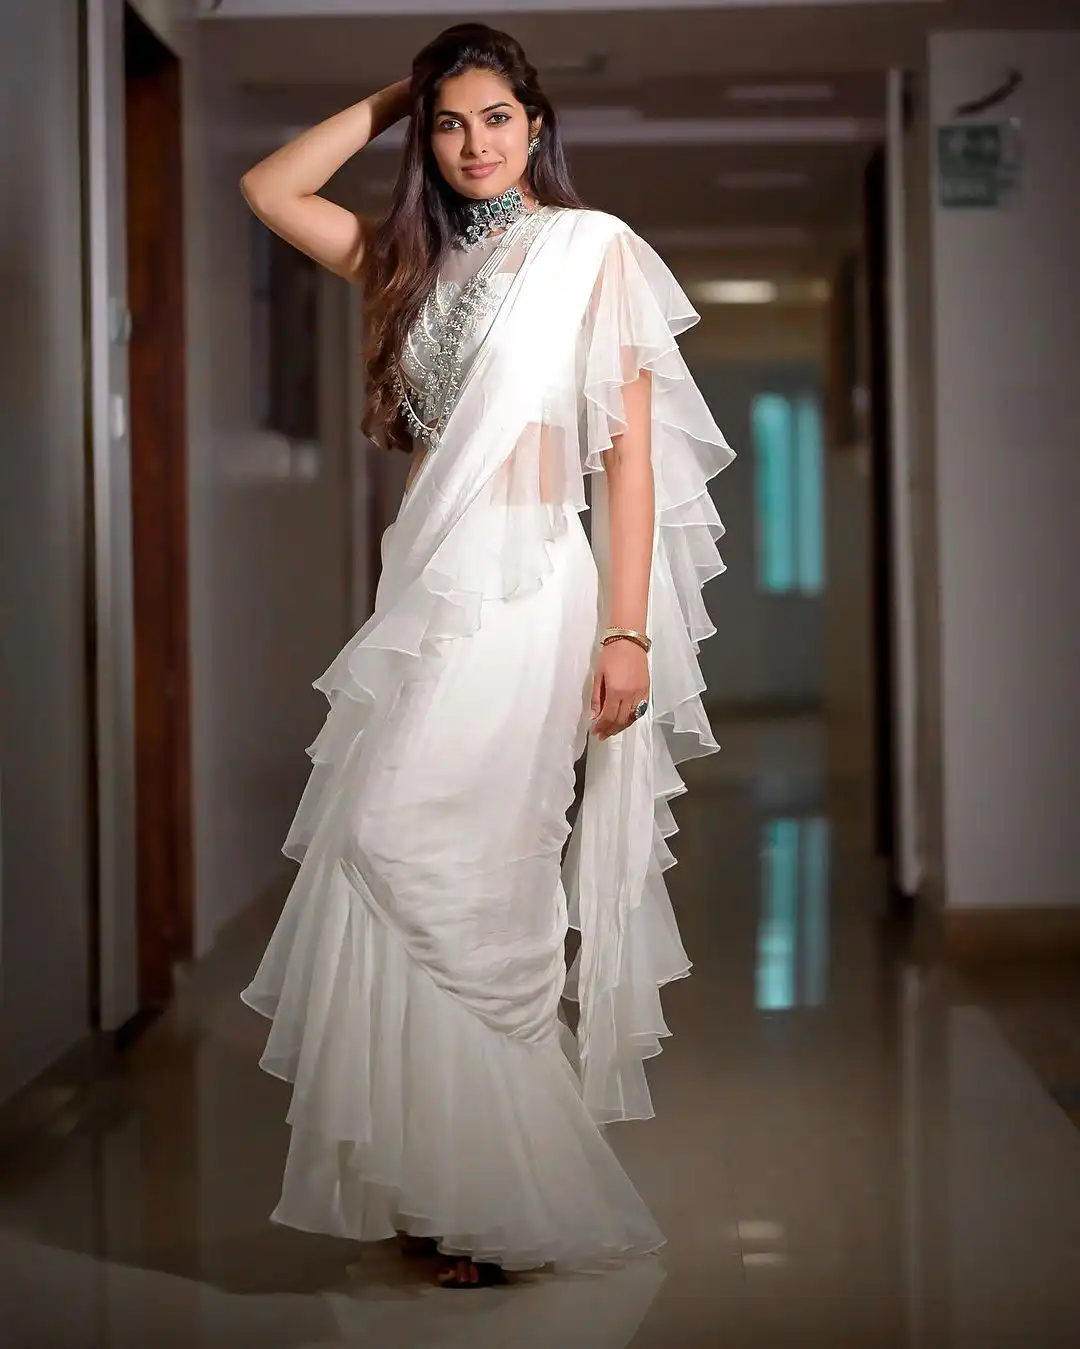 Divi Vadthya Stunning Looks in White Saree 